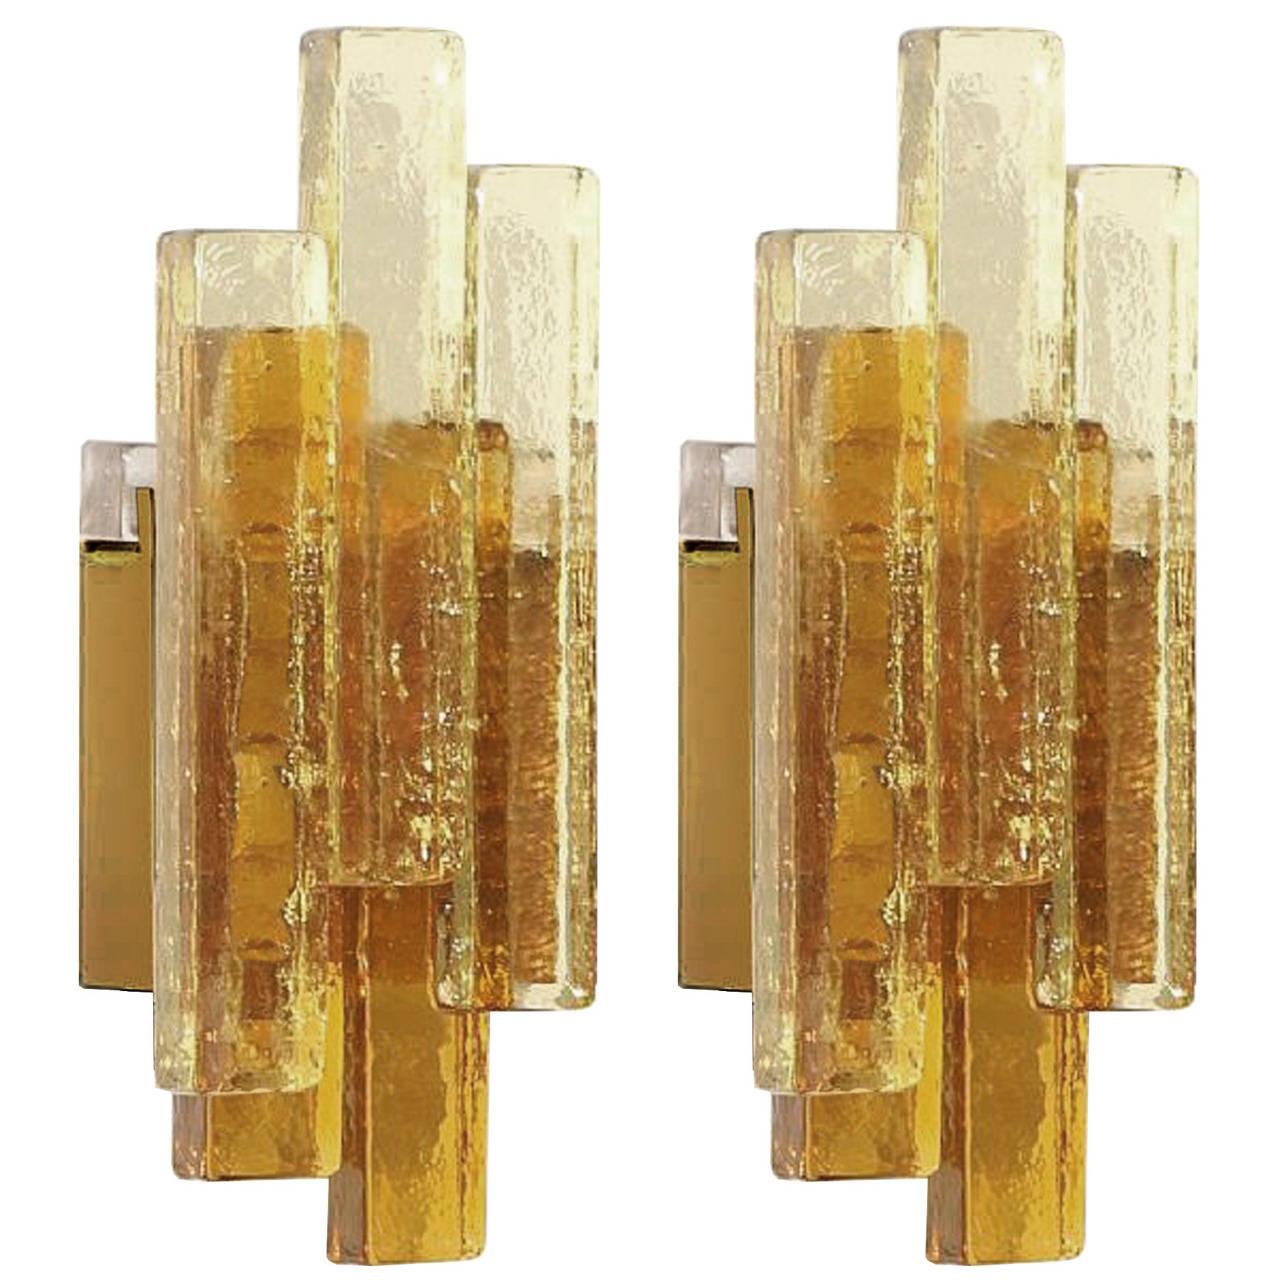 Pair of Amber Glass Sconces by Svend Aage Holm Sorensen, (two pair available) In Excellent Condition For Sale In New York, NY